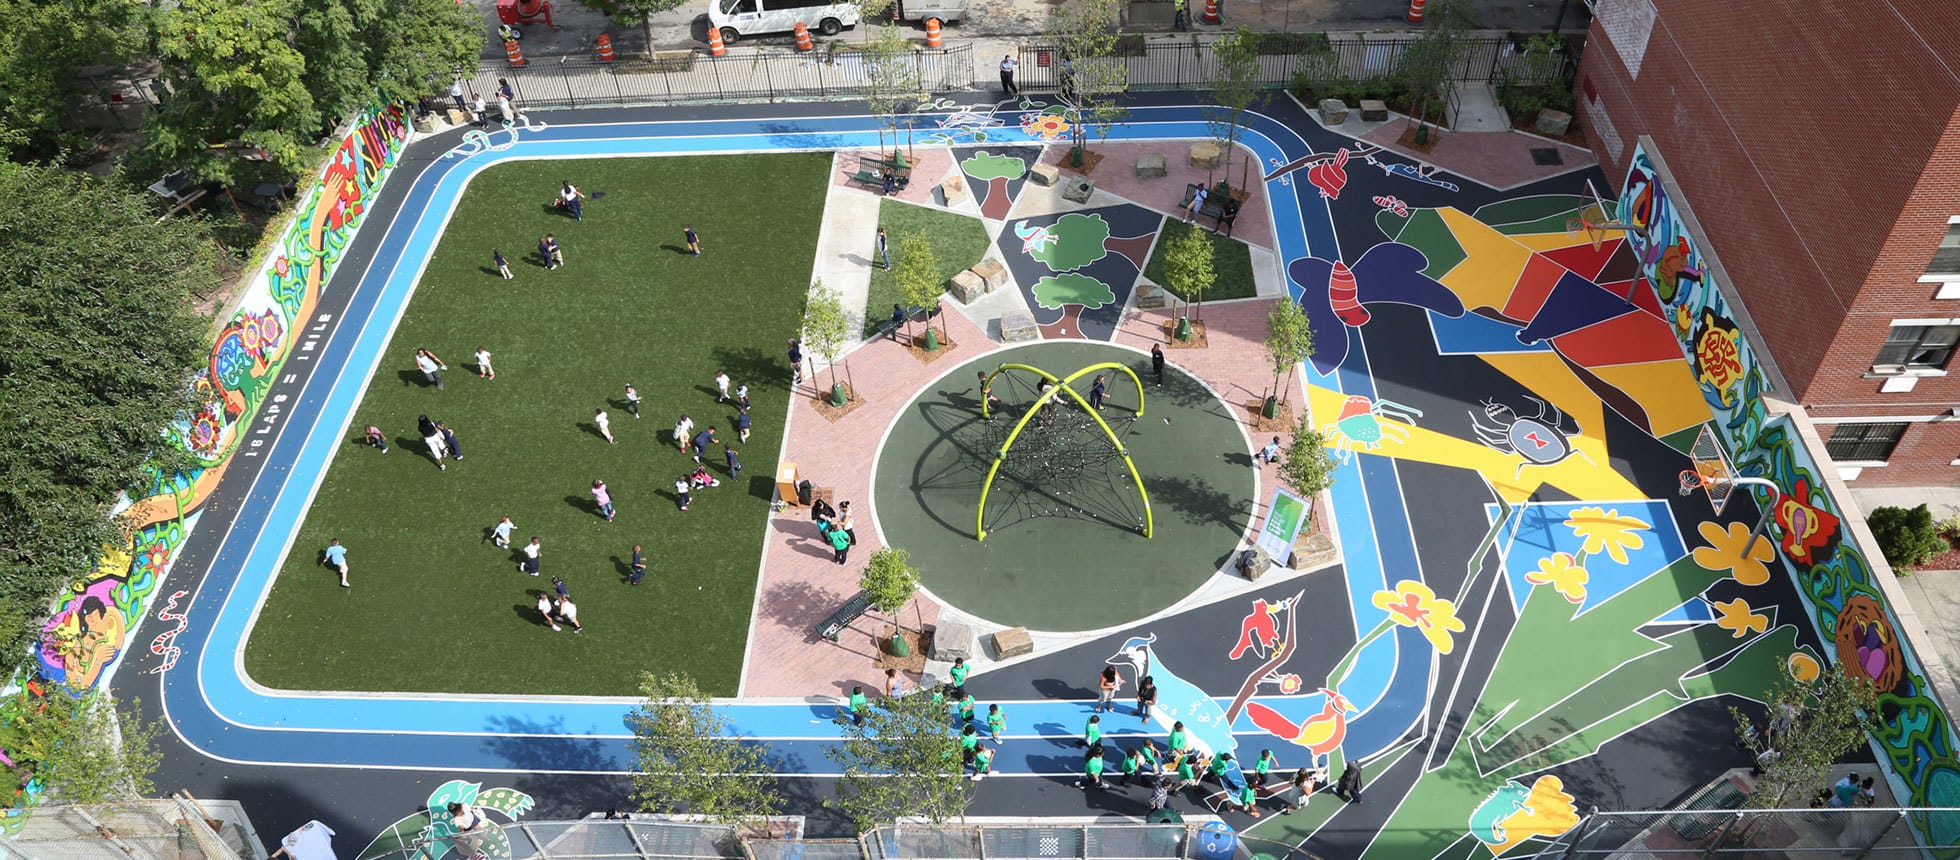 An aerial view of a playground with people playing on it.